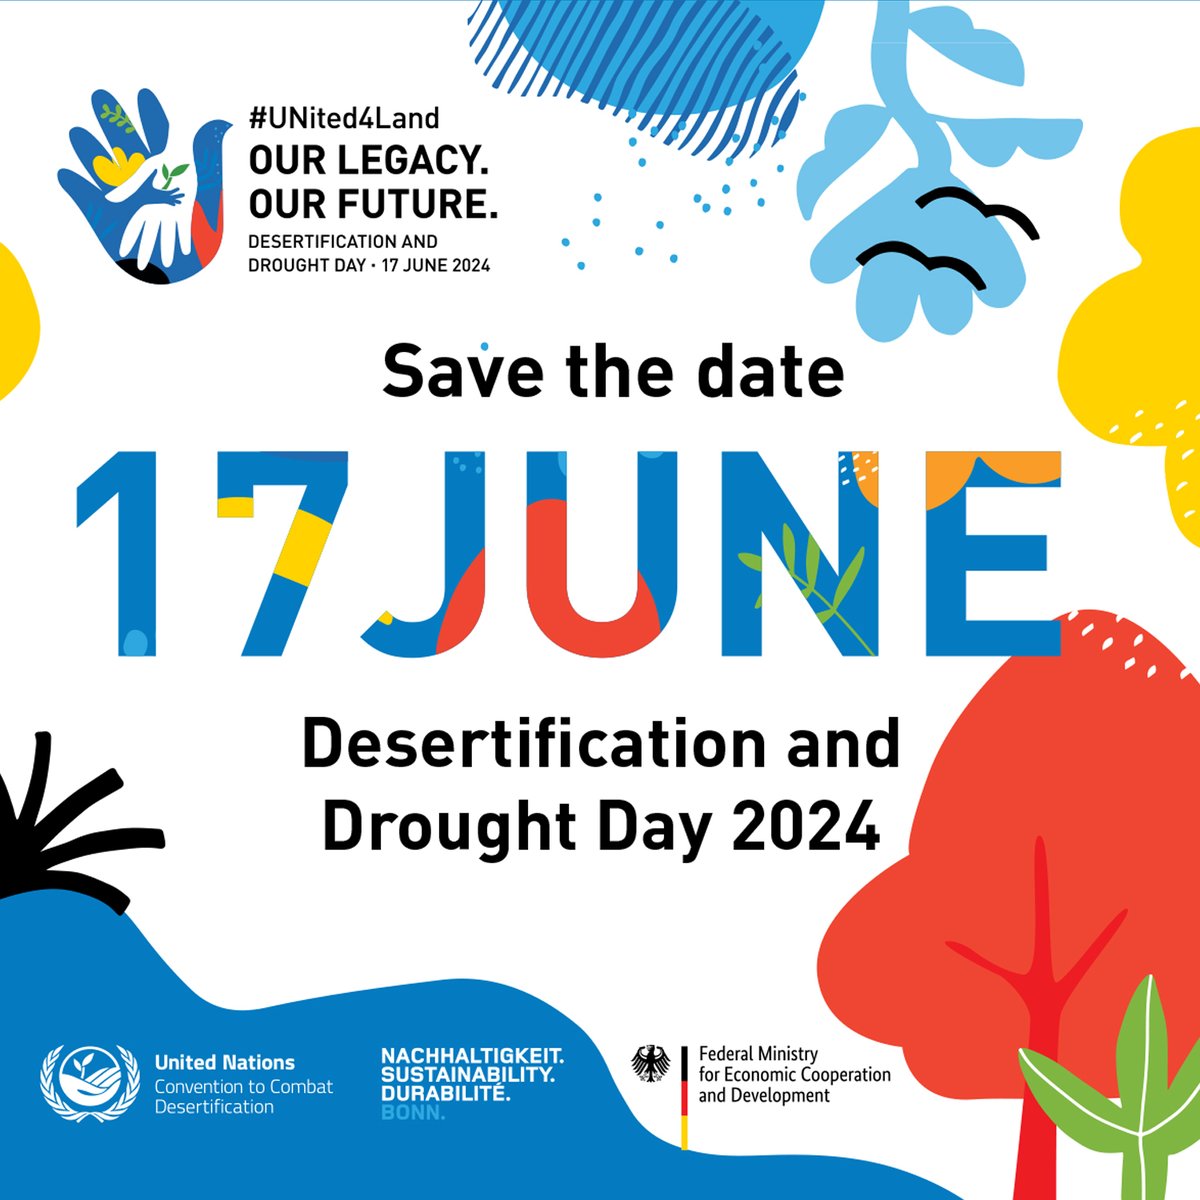 📅 Save the date!
🚀 Unveiling the #DesertificationAndDroughtDay 2024 logo! A symbol of unity for land restoration. 
🌱Join us in turning the tide against land degradation and forging a sustainable future. Every action counts! 
#United4Land ➡️ unccd.int/DDD2024